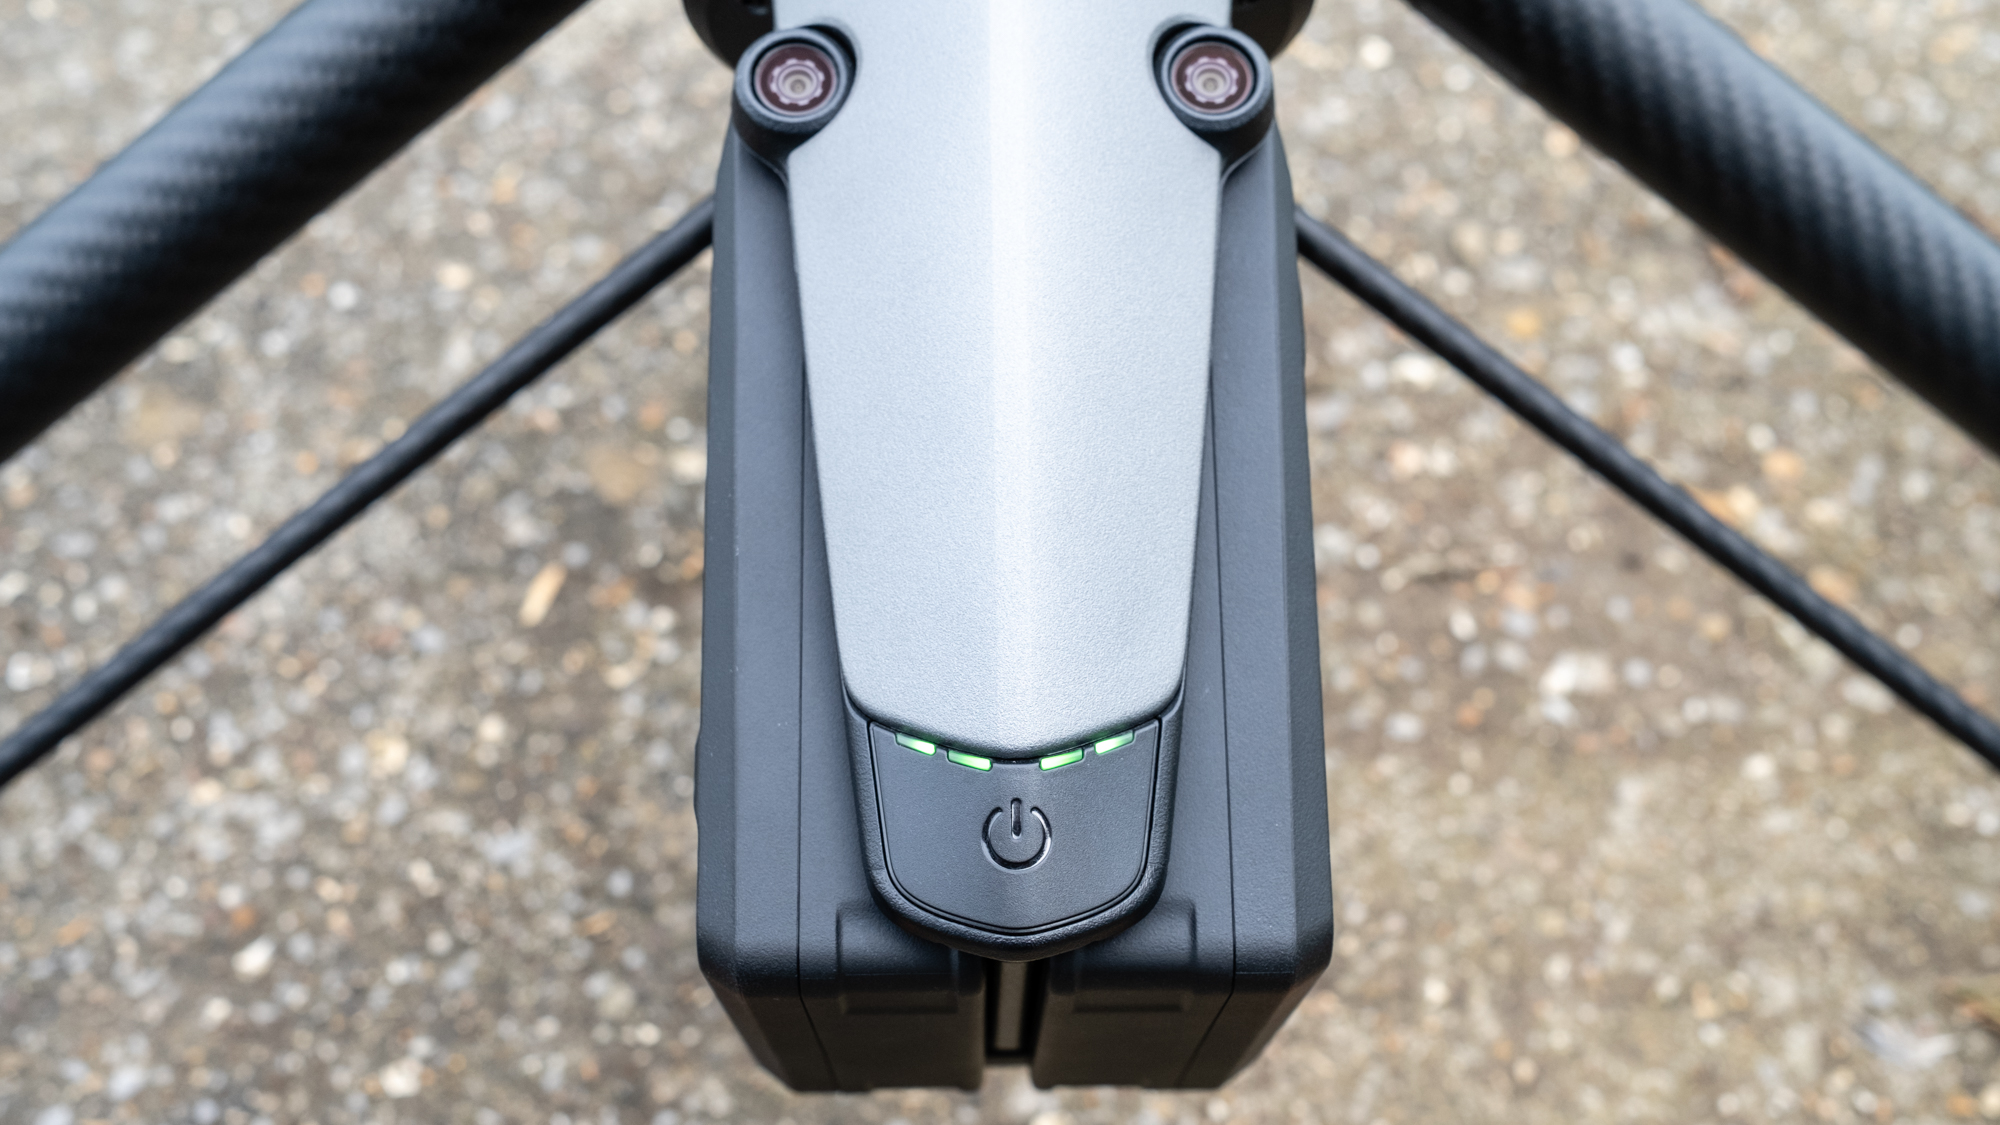 DJI Inspire 3 drone close up of body